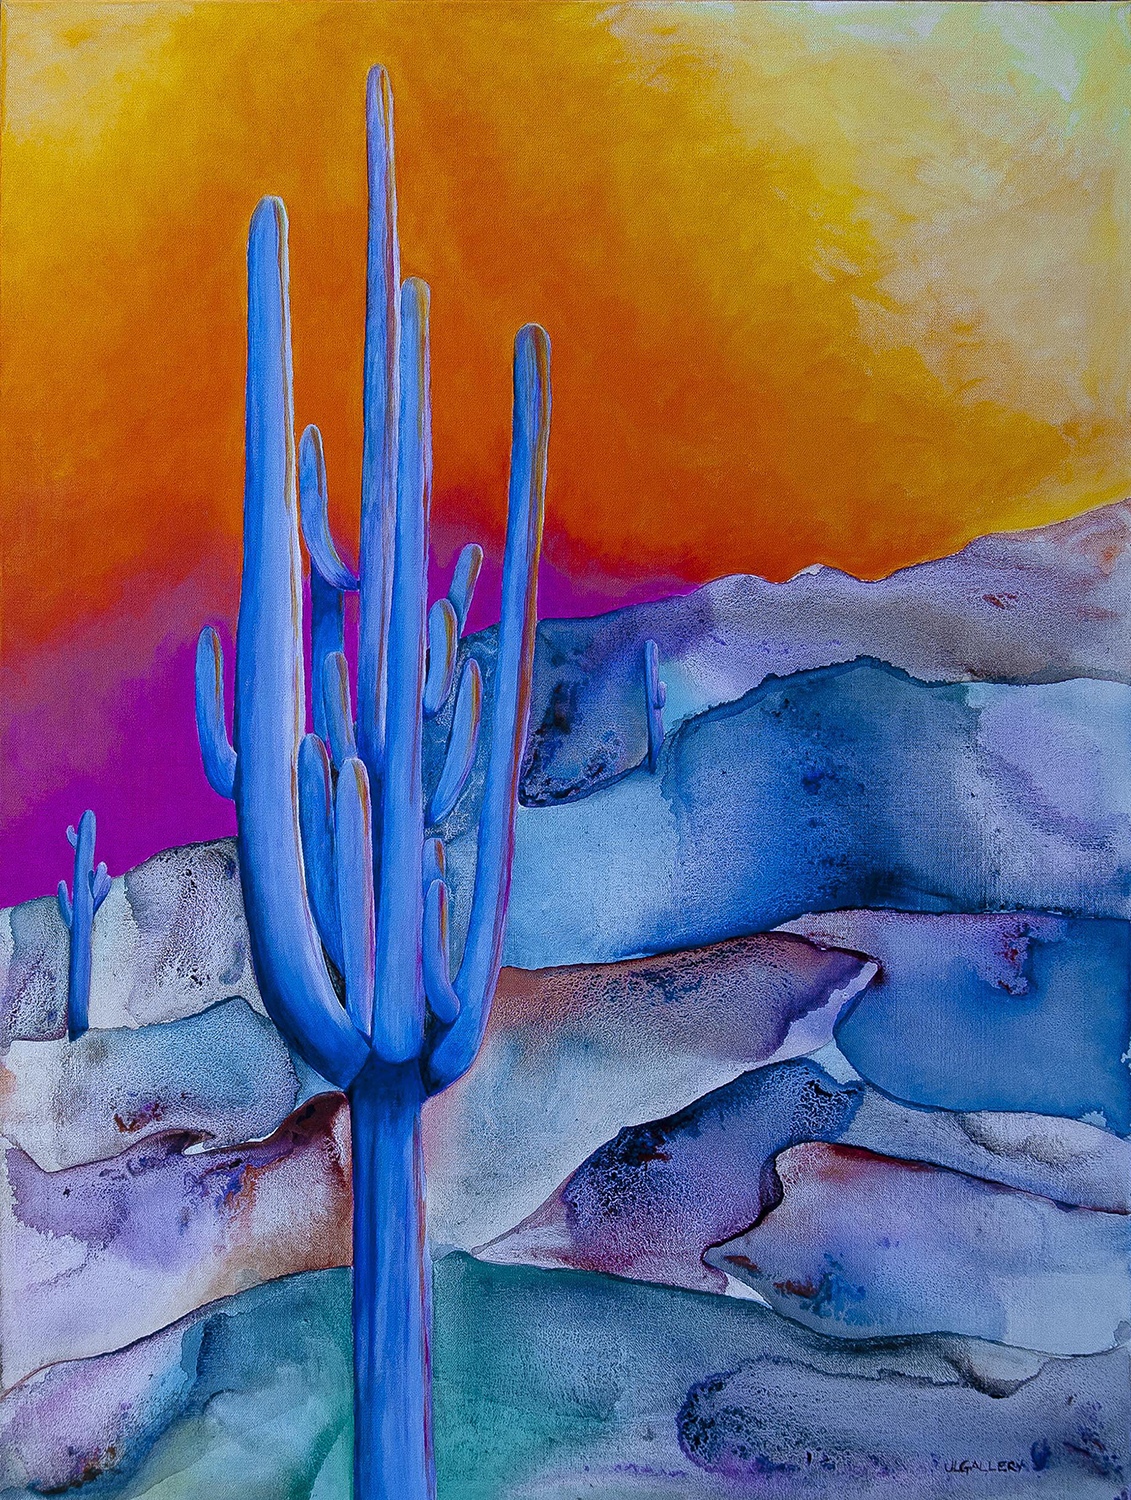 Pinnacle Peak Giant, saguaro, cactus, north Scottsdale, acrylic painting. Blue cactus with a warm sunset in the backgroun